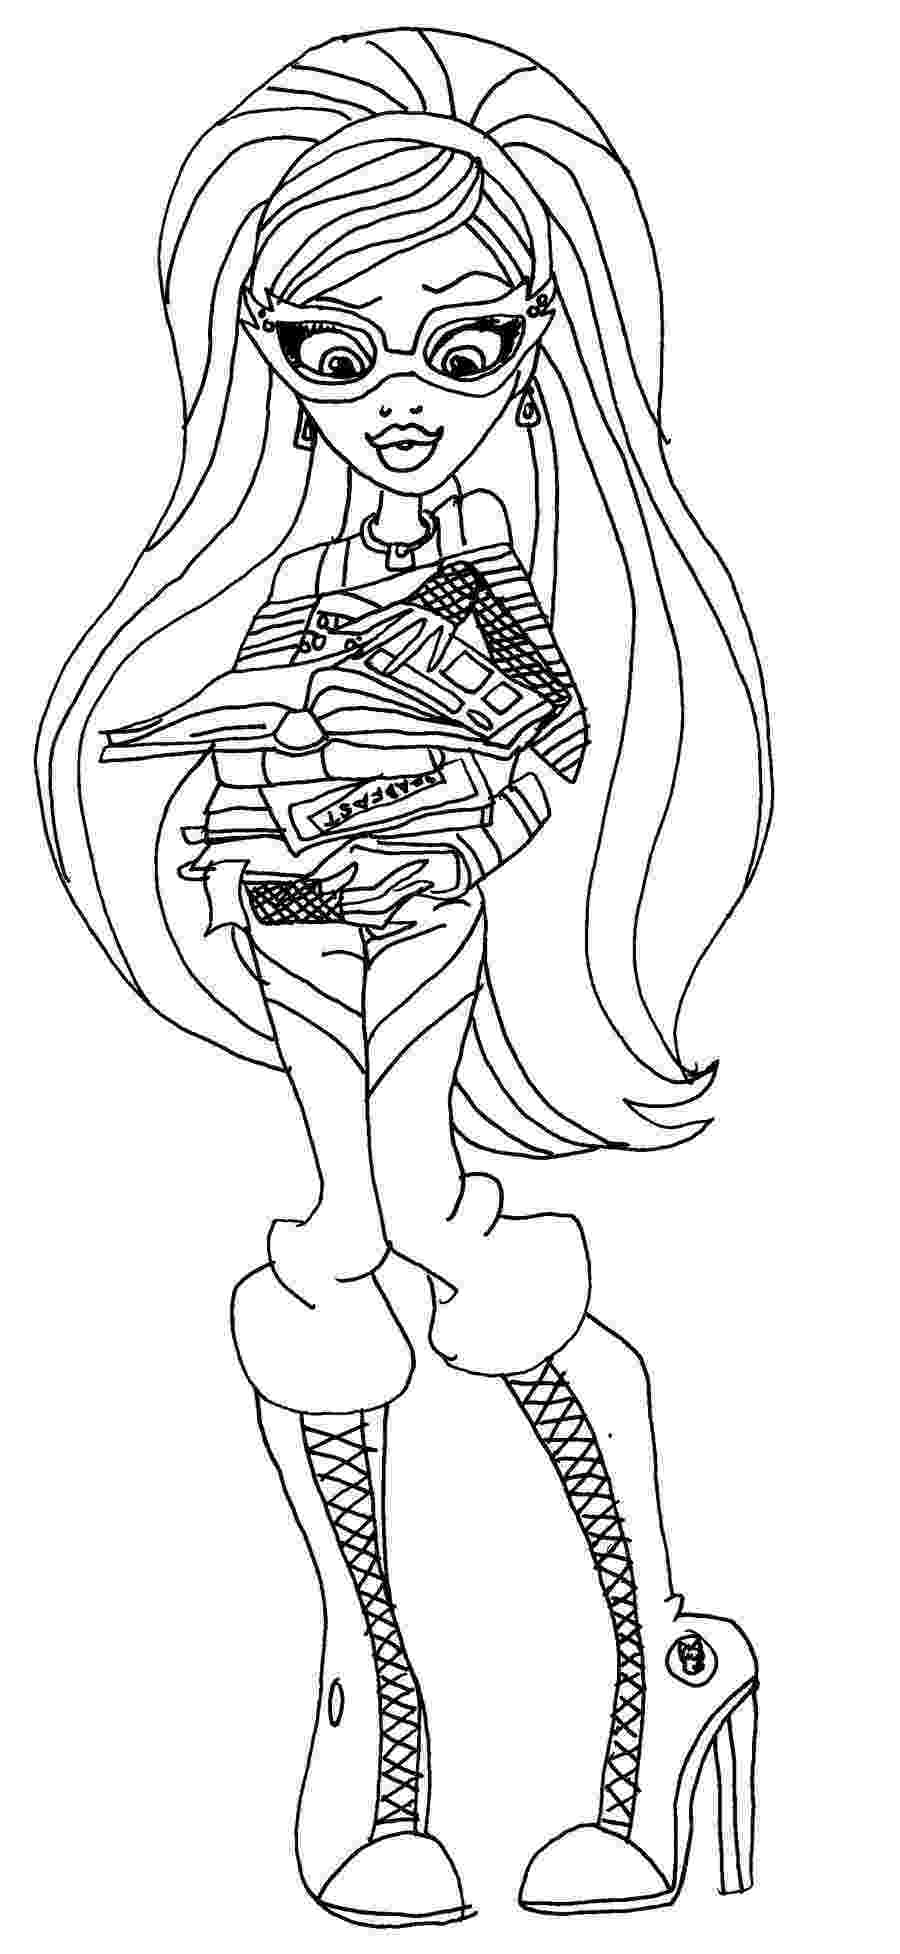 coloring pages of monster high dolls ghoulia yelps monster high coloring page coloring books dolls pages of coloring high monster 